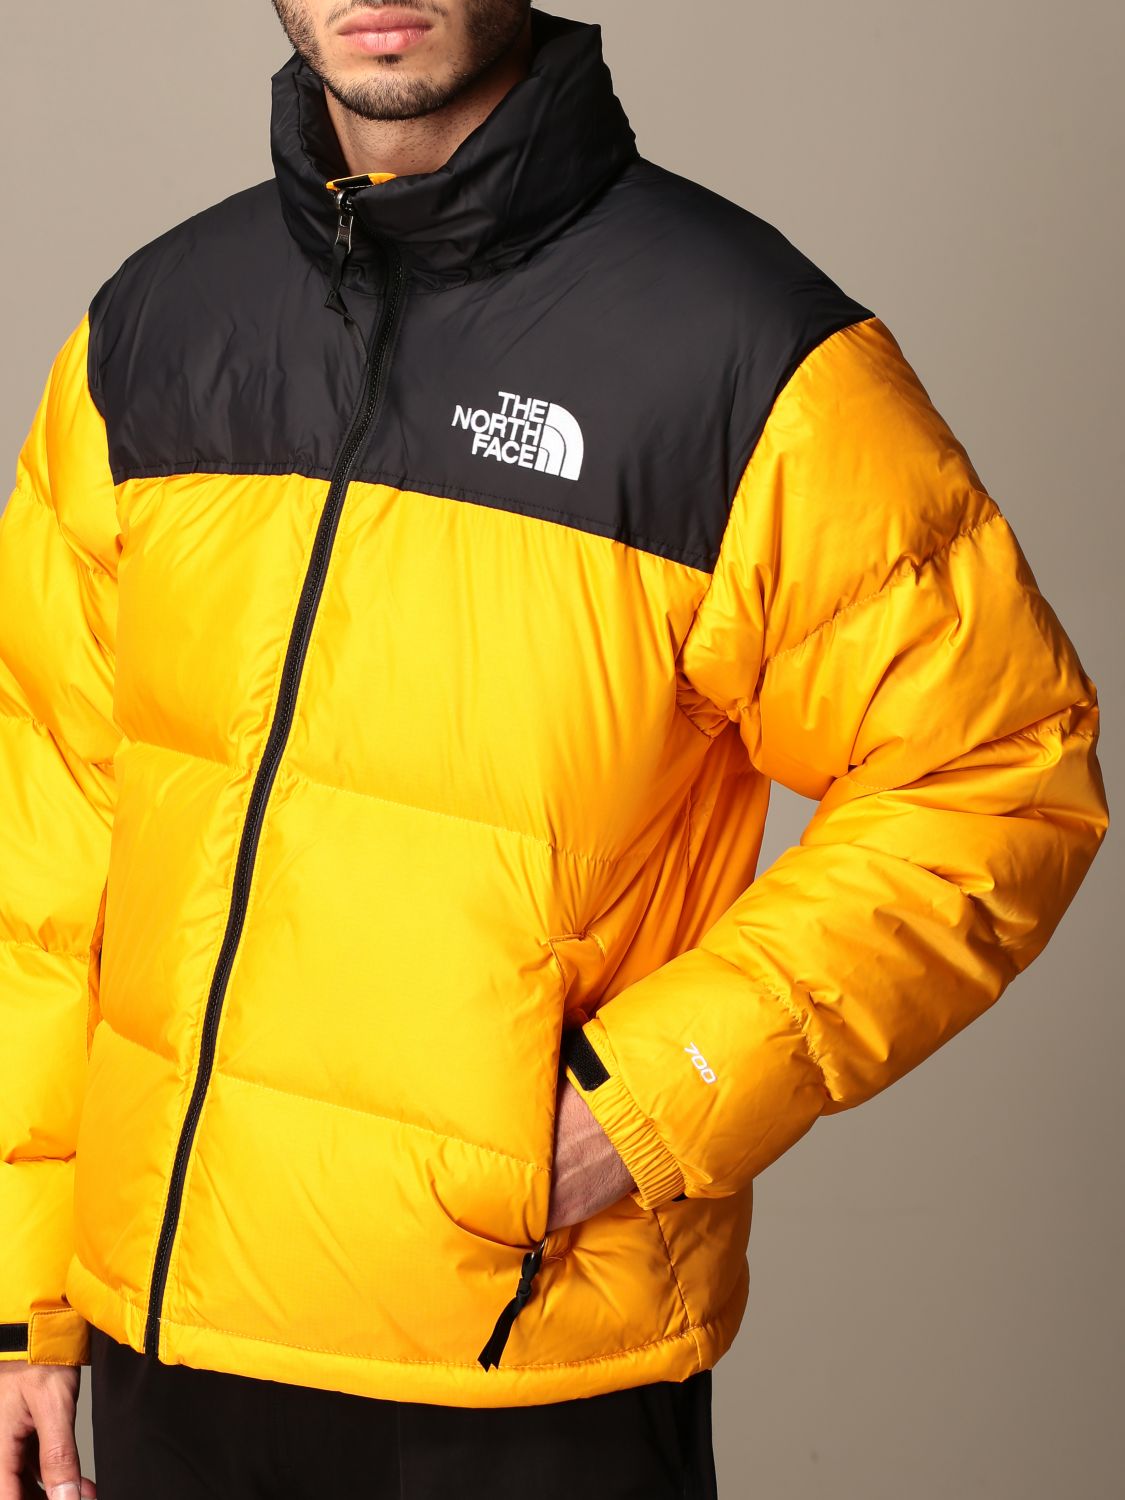 the-north-face-nuptse-down-jacket-with-logo-jacket-the-north-face